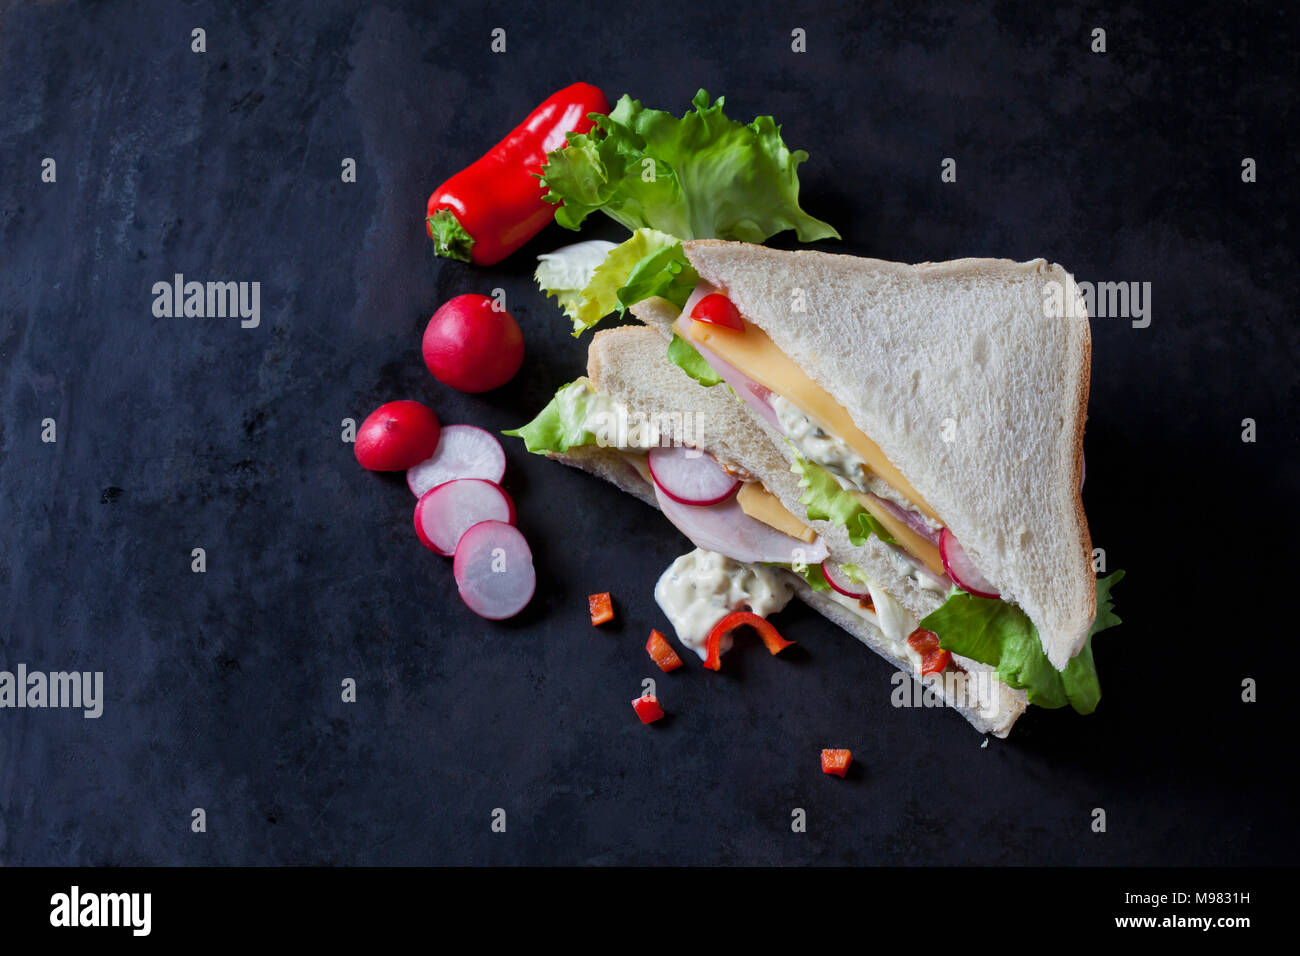 Sandwich with ham and cheese Stock Photo